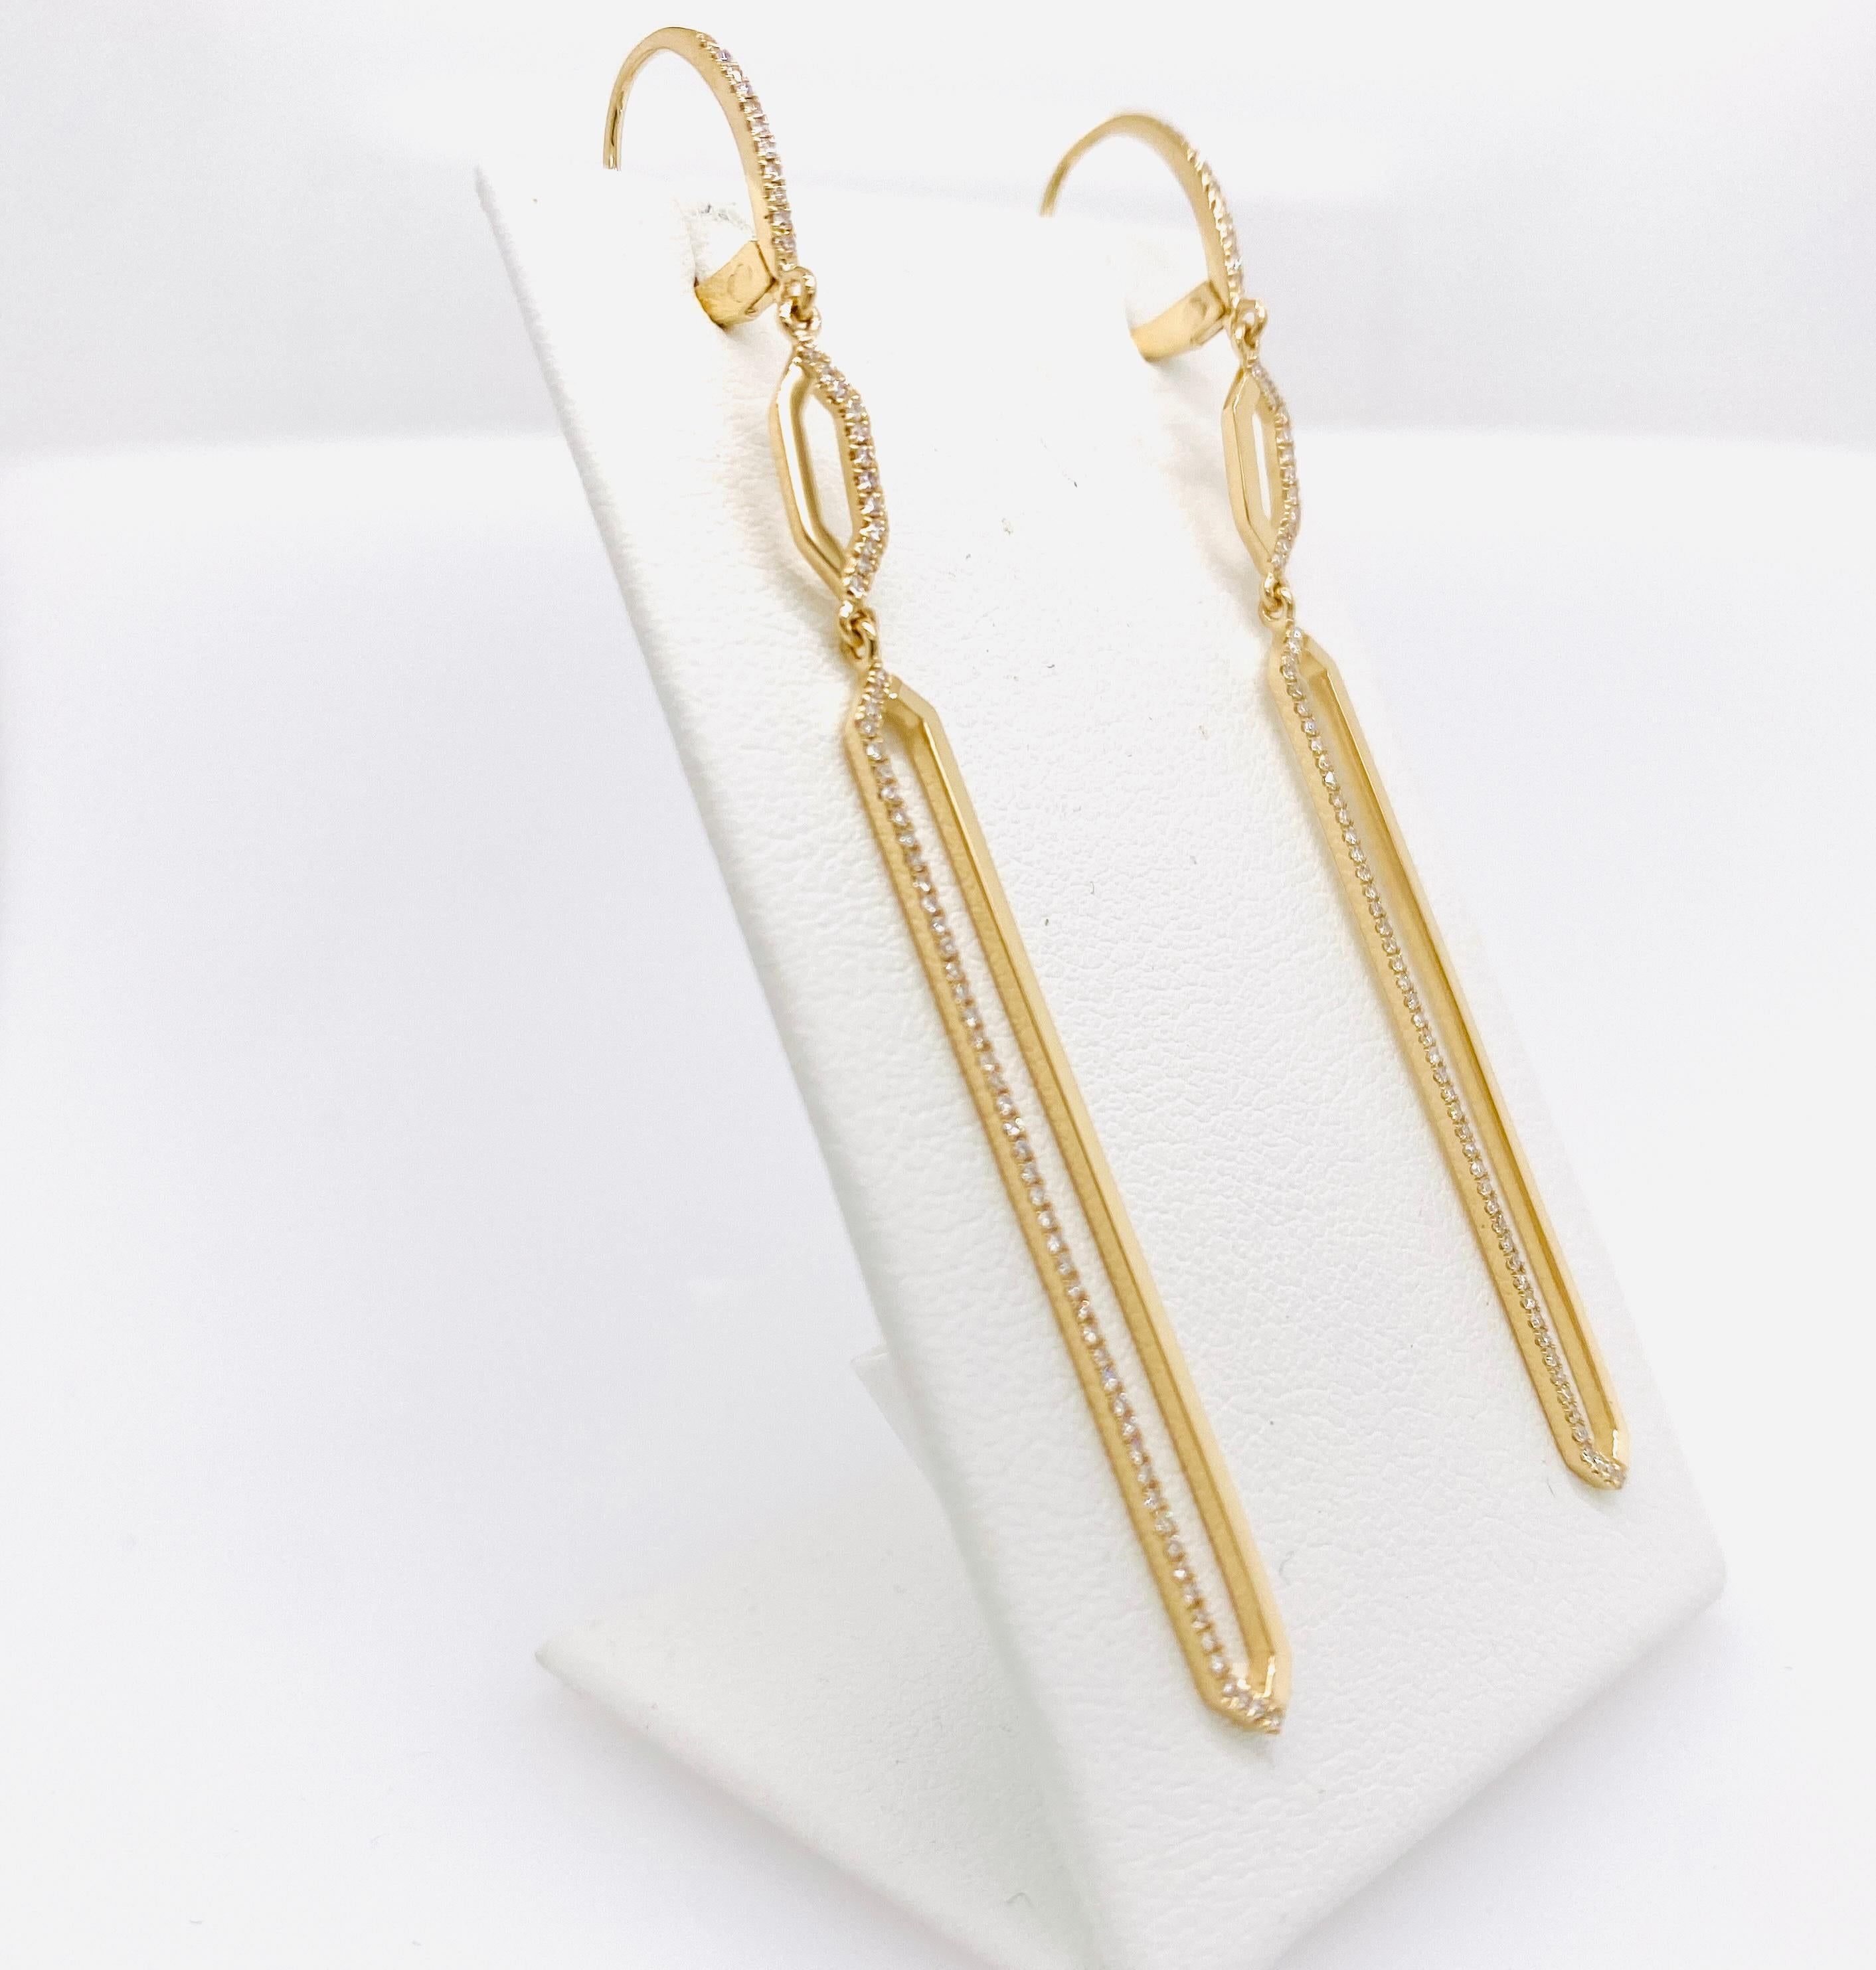 Gracefully dancing dangles hang from your ears in these beautifully contrasting geometric long link earrings. The narrow line of the earring makes it easy to wear and accent your face and neck. The hinged lever back earring top has diamonds down the